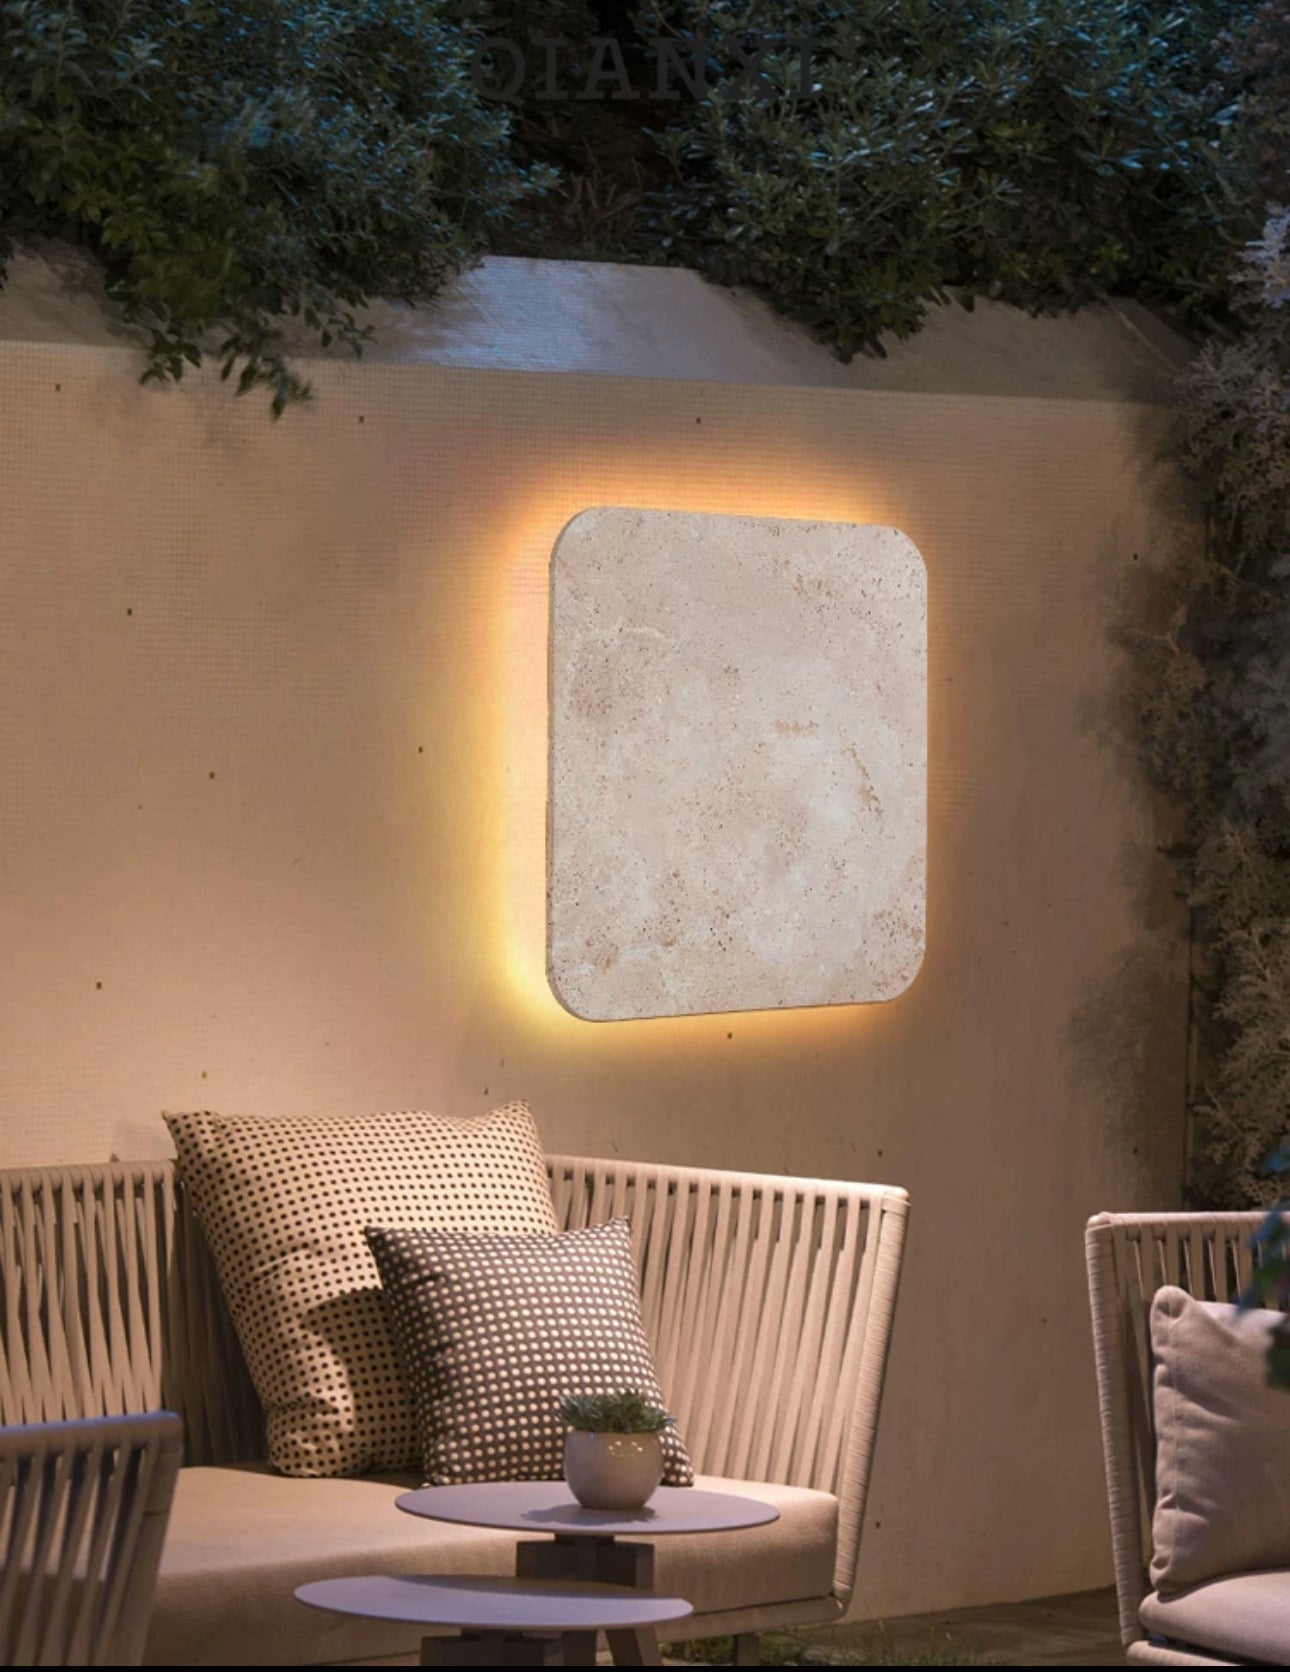 Luxurious Marble And Stone 60cm Warm Led Lighting Intelligent Control Waterproof - Minimalist Wall Lamps